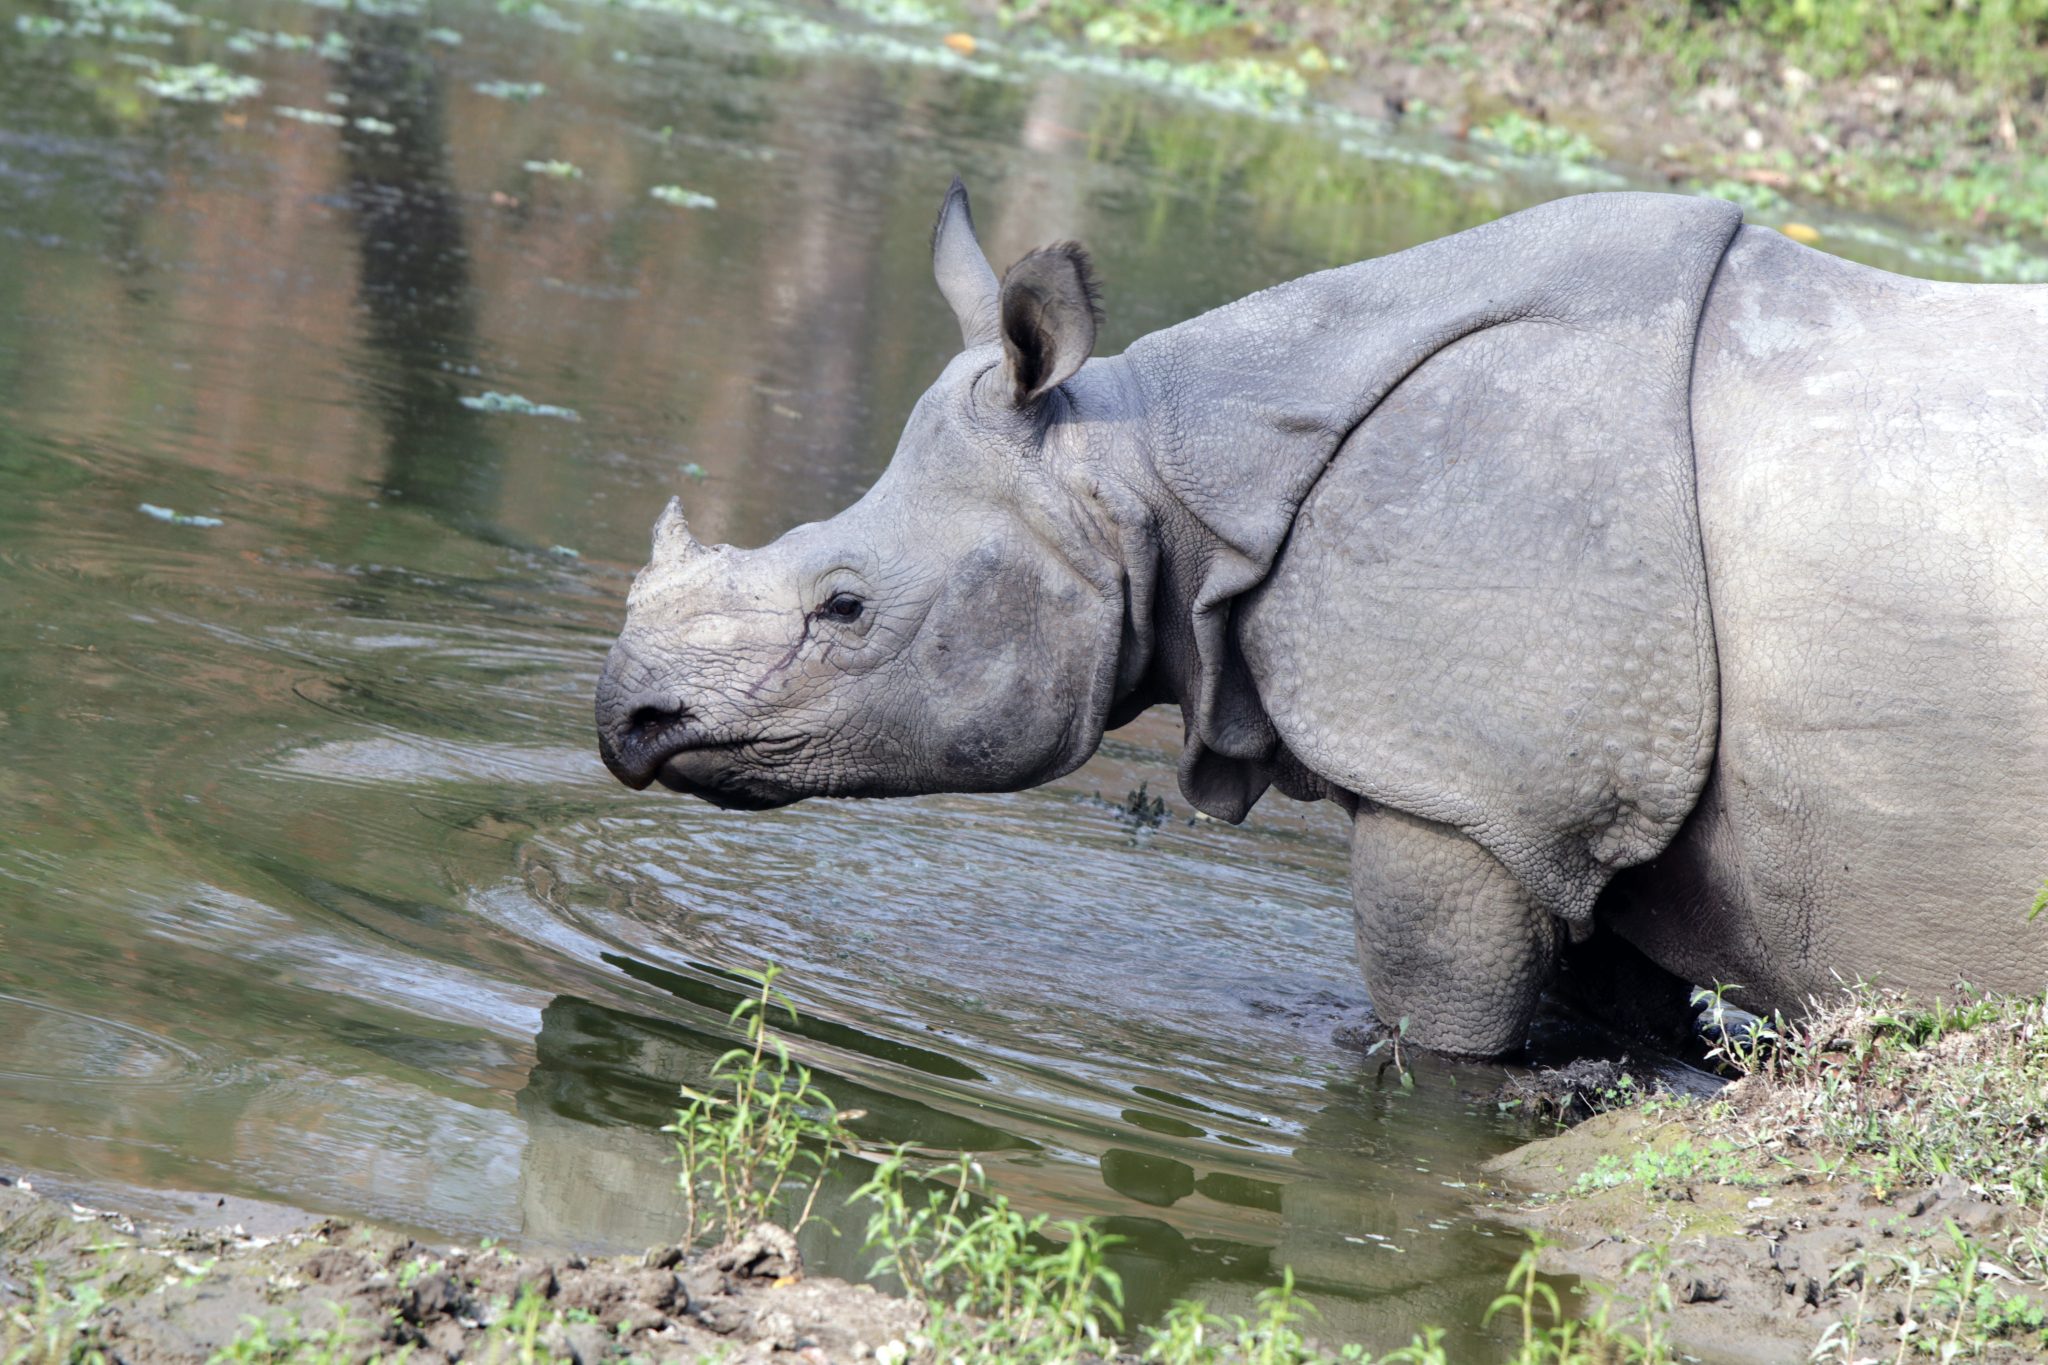 One Horn Rhino standing with forelegs in water up to its knees, but back legs up on dry land.